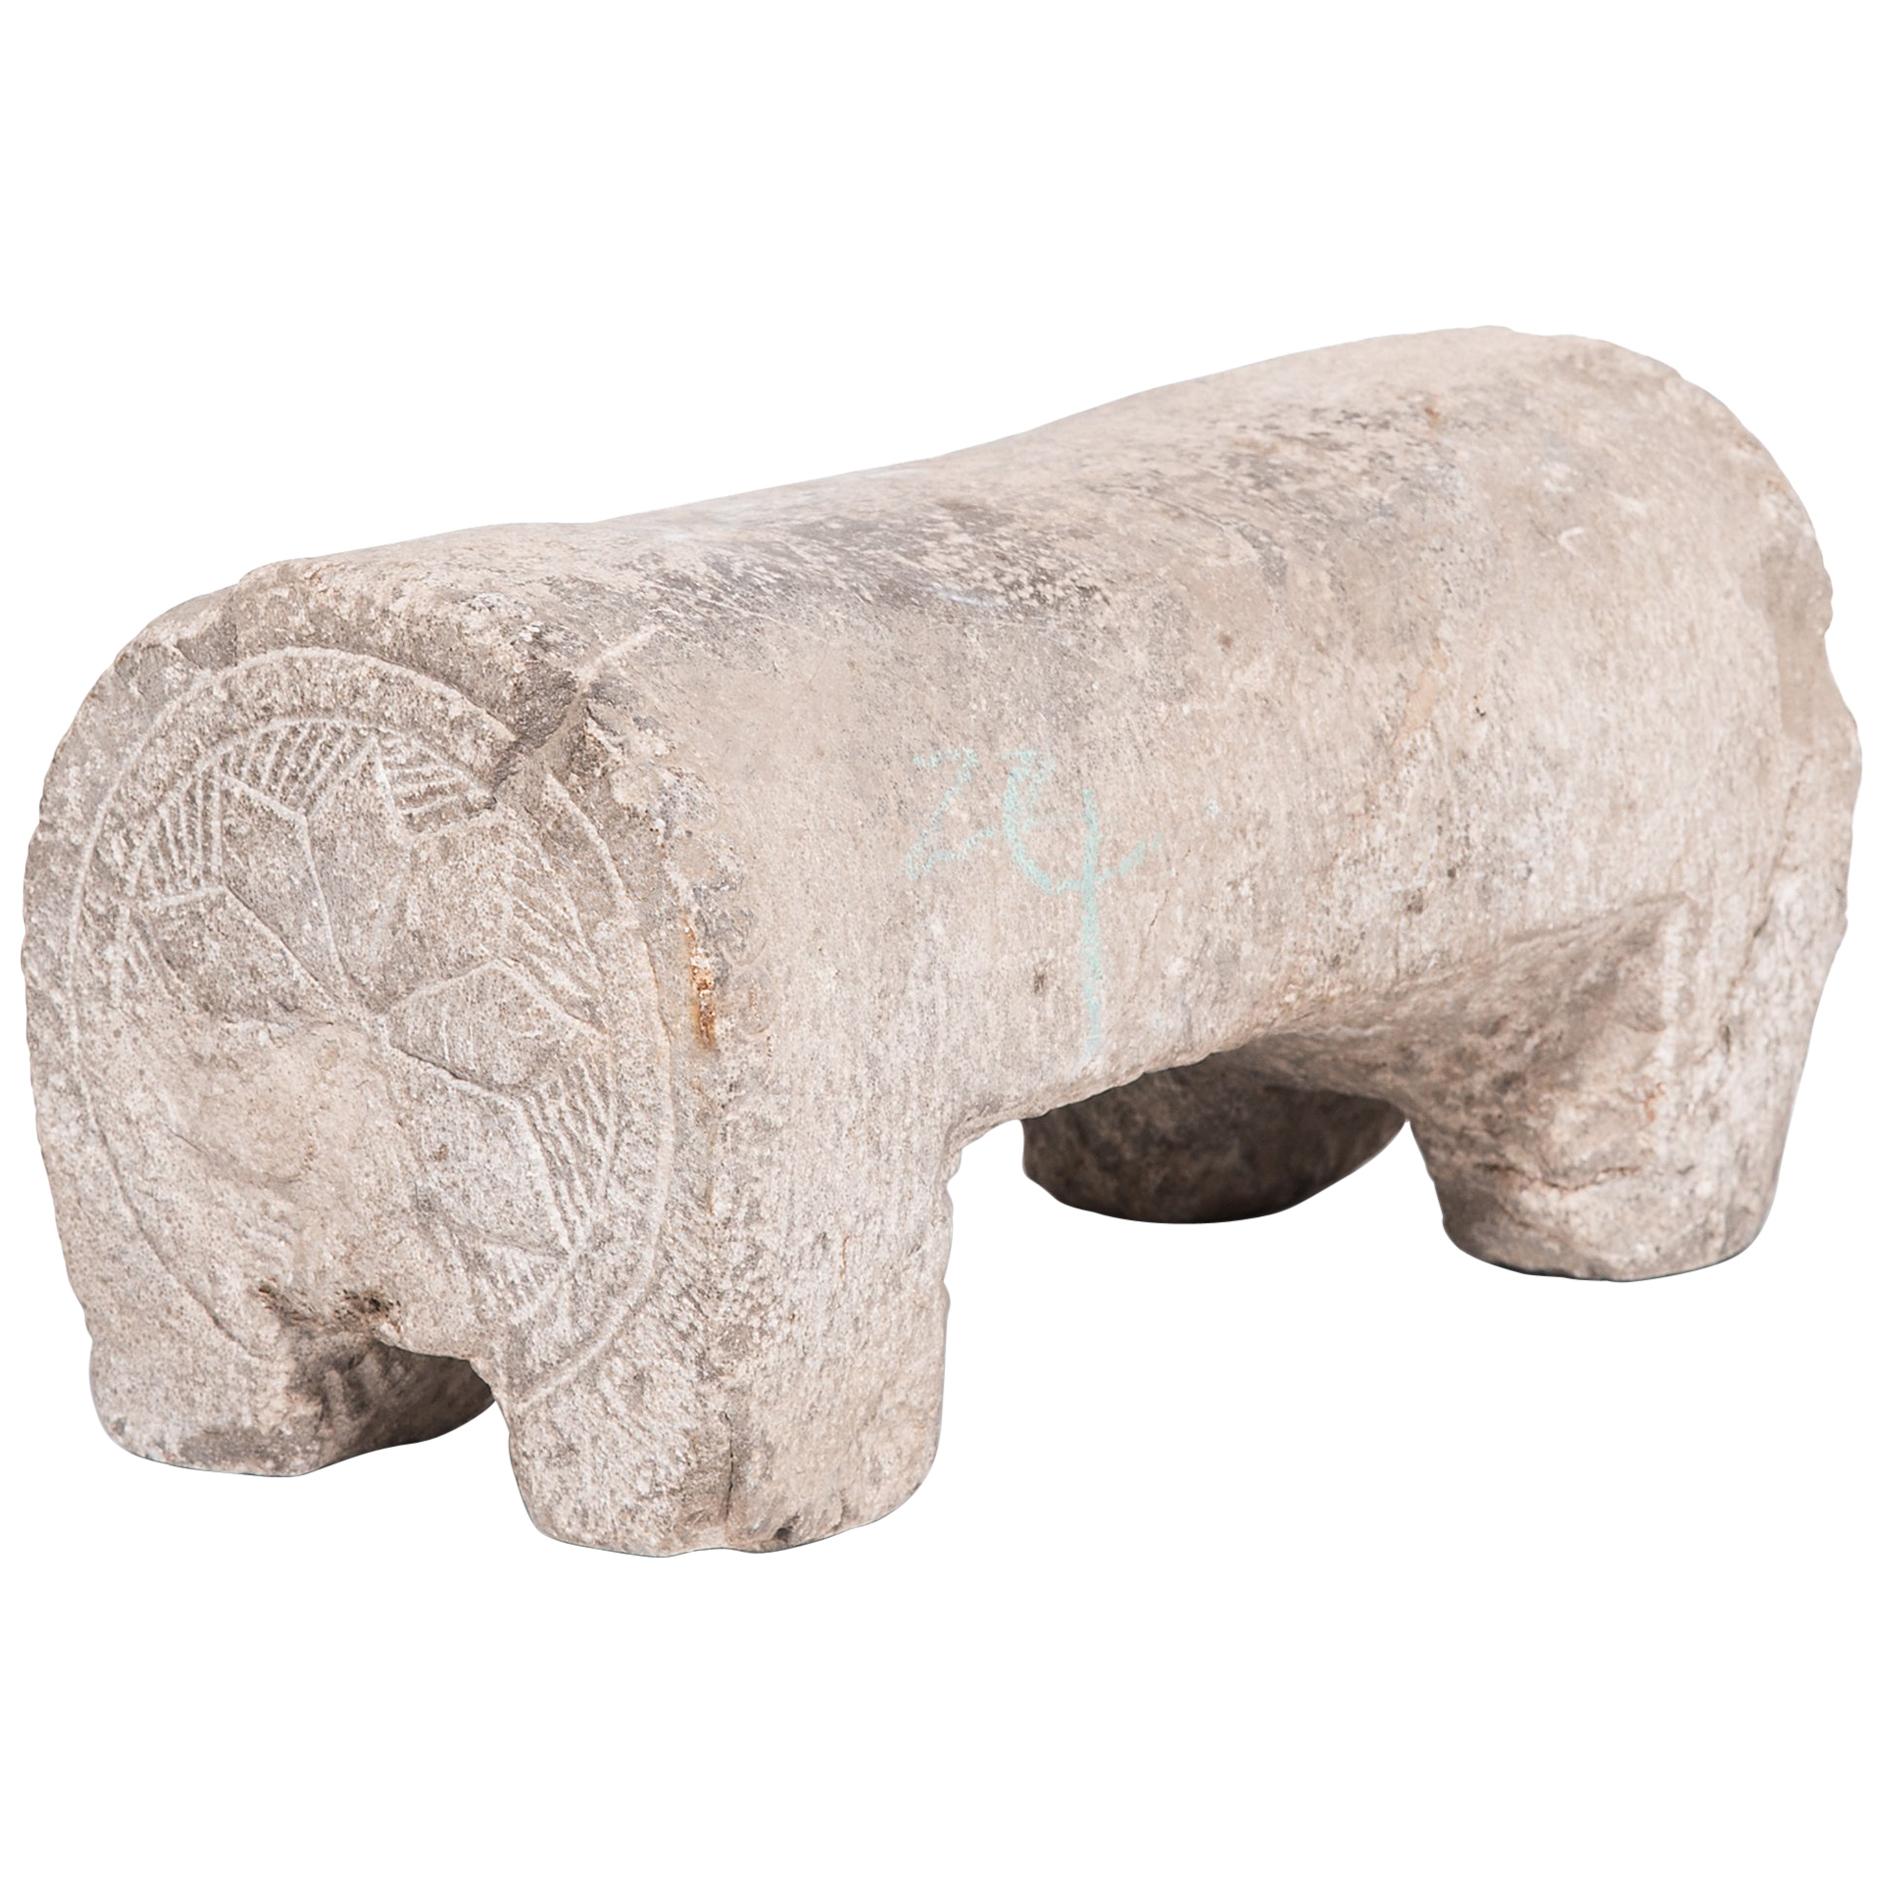 Chinese Limestone Foot Rest, c. 1900 For Sale